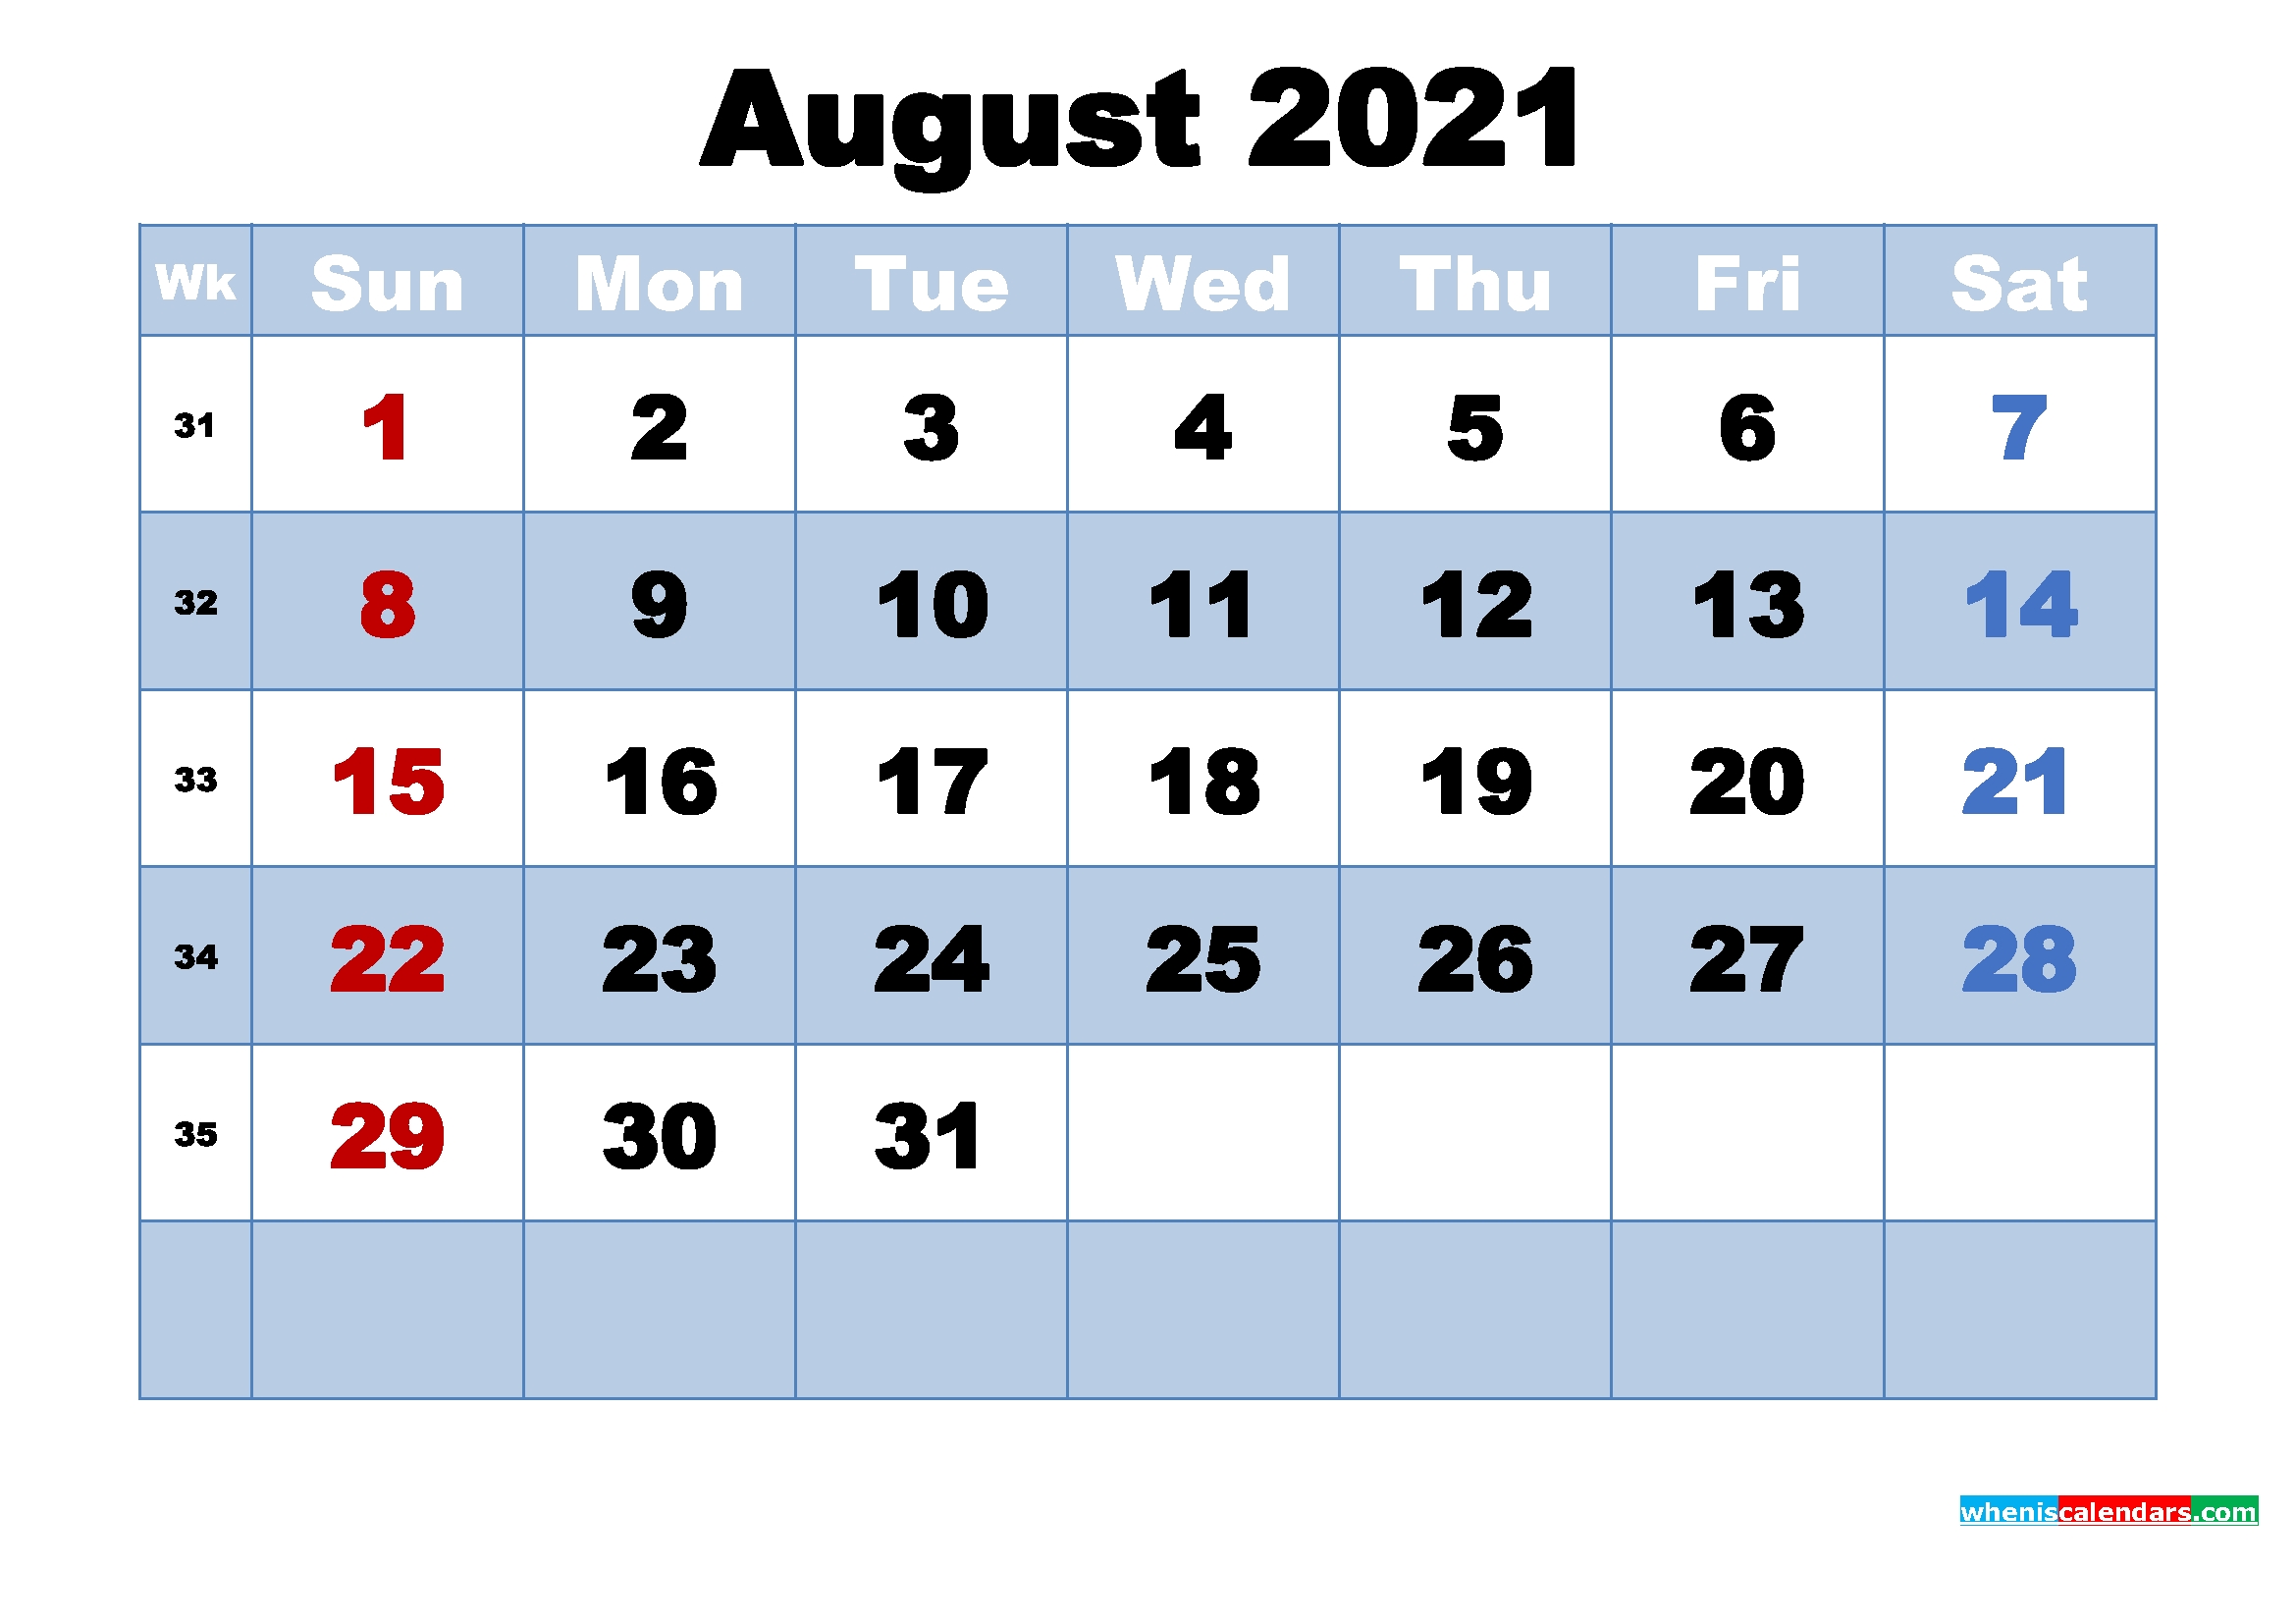 Free Printable 2021 Monthly Calendar With Holidays August August 2021 Calendar With Holidays